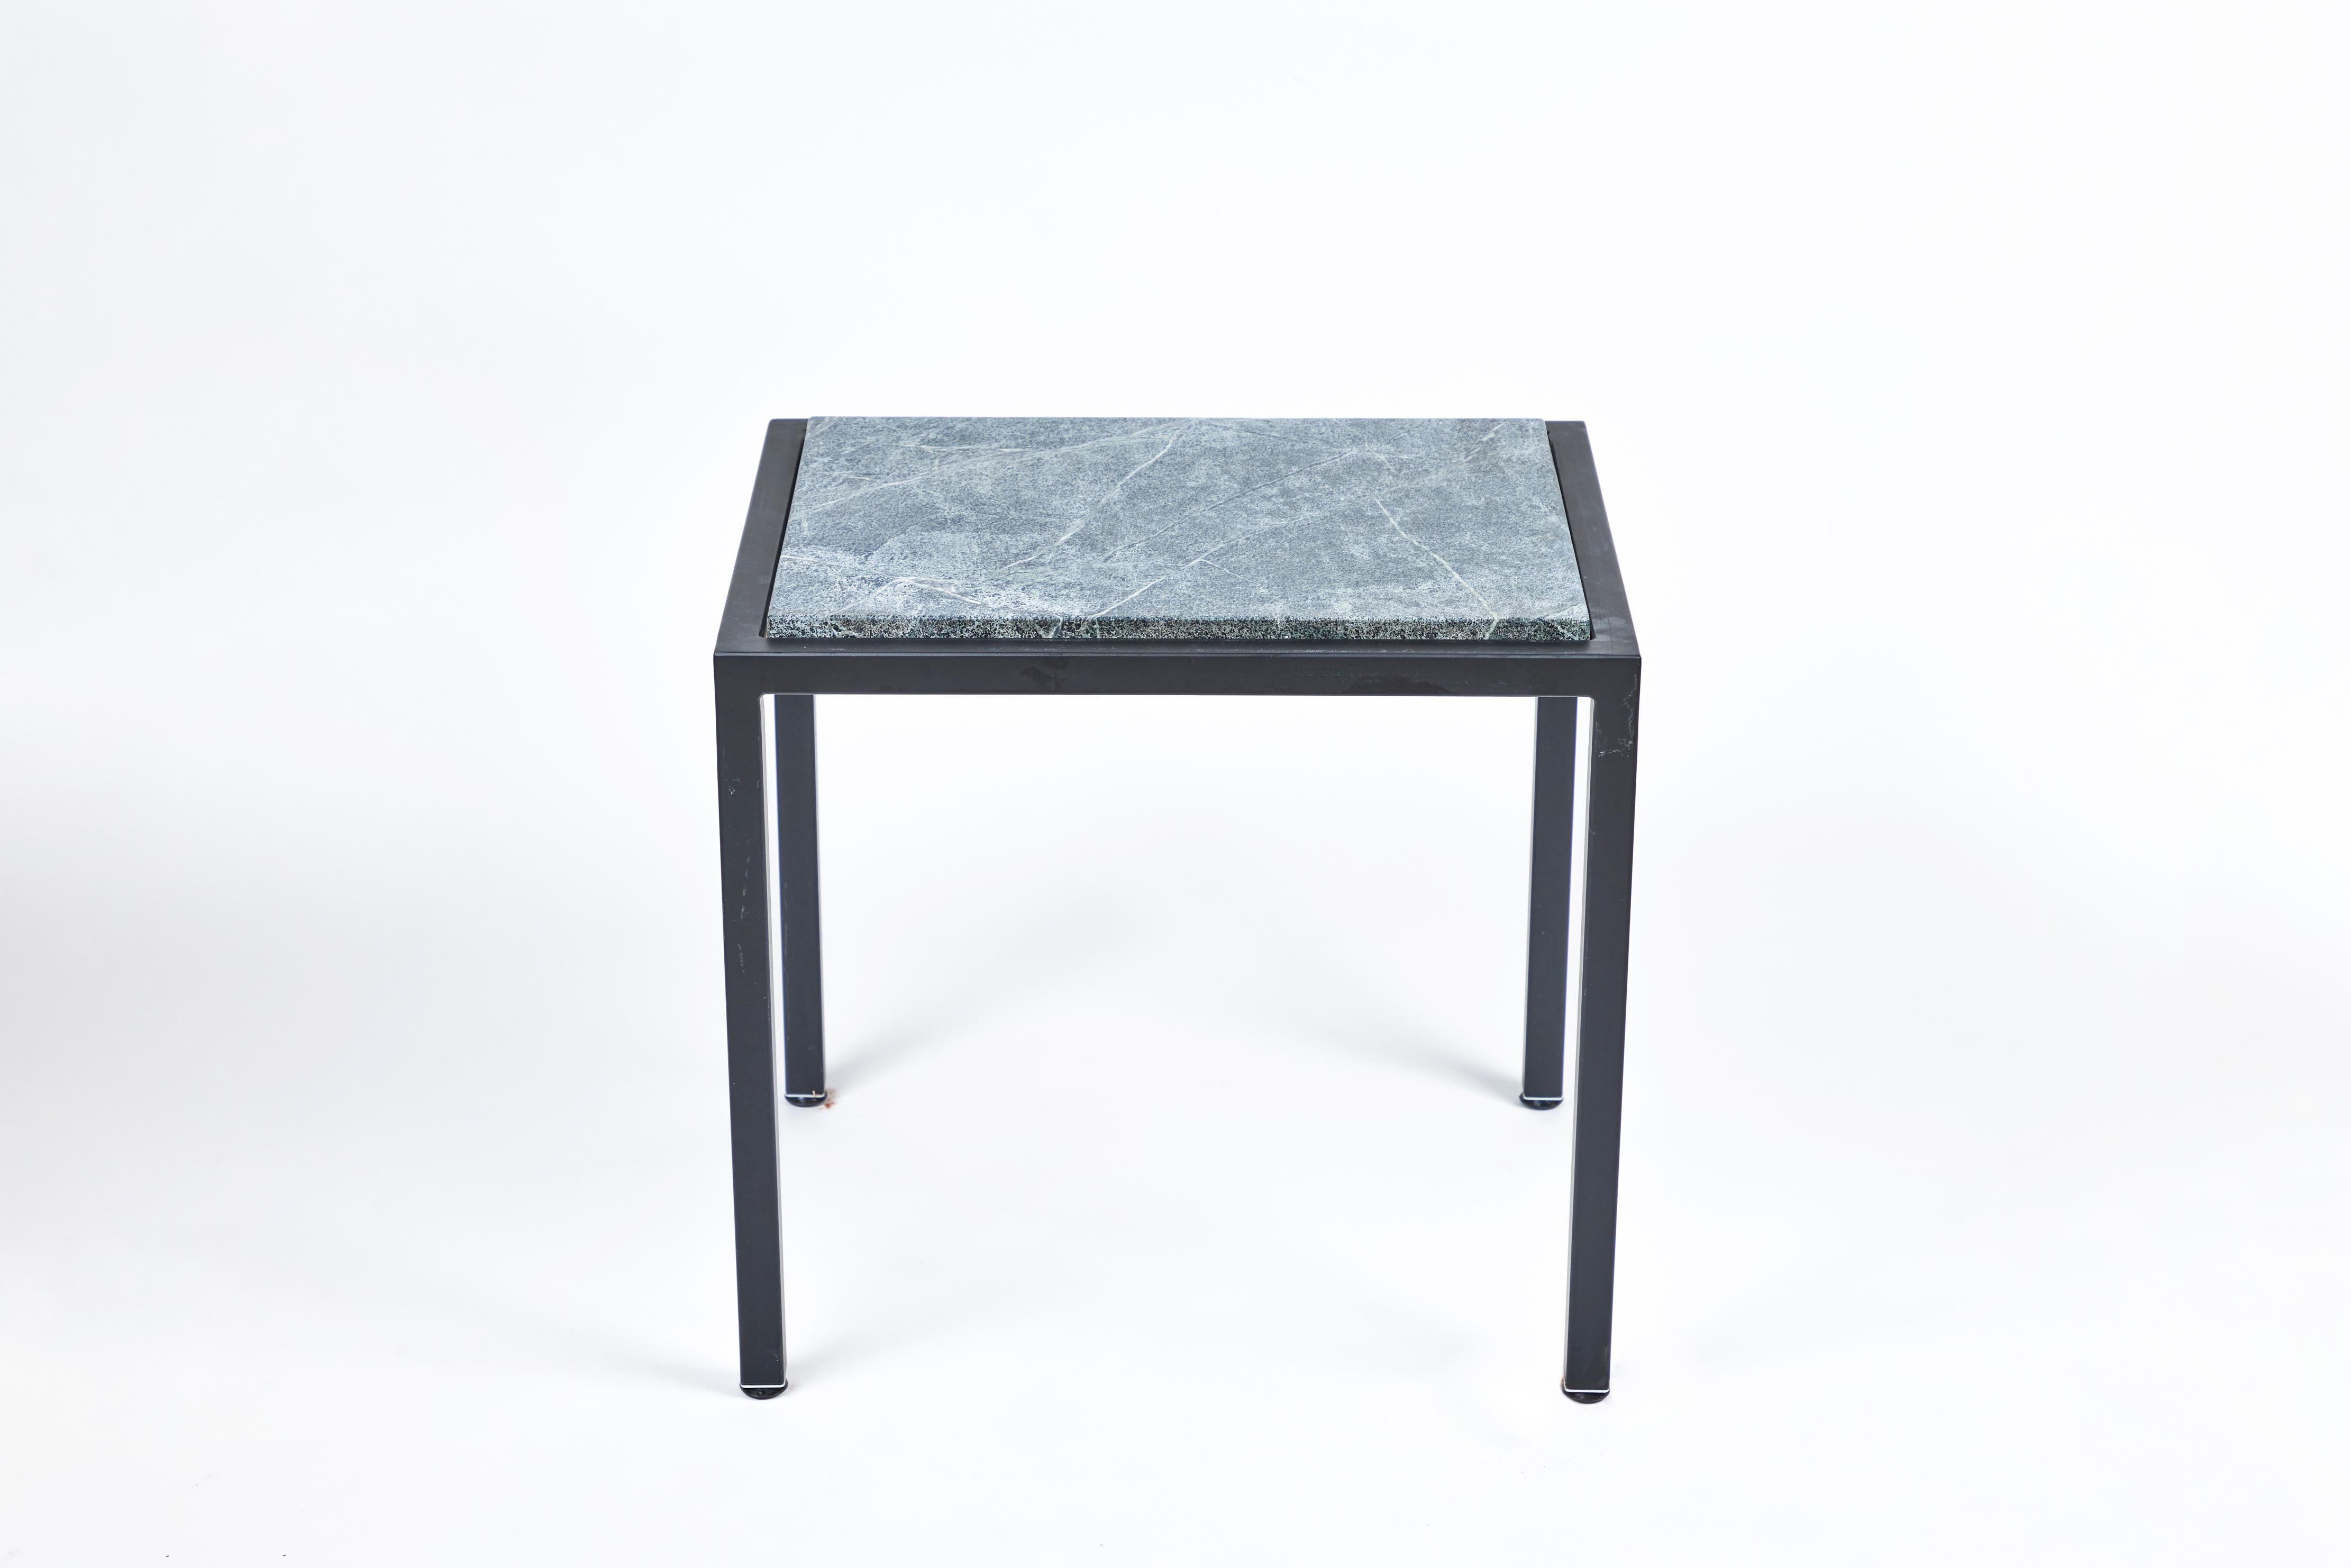 This fantastic custom compact rectangular two-piece iron side table has an attractive new soapstone top with beautiful rounded edges. It has been powder coated in a rich black finish to complement the deep green tones of the natural stone. It is the